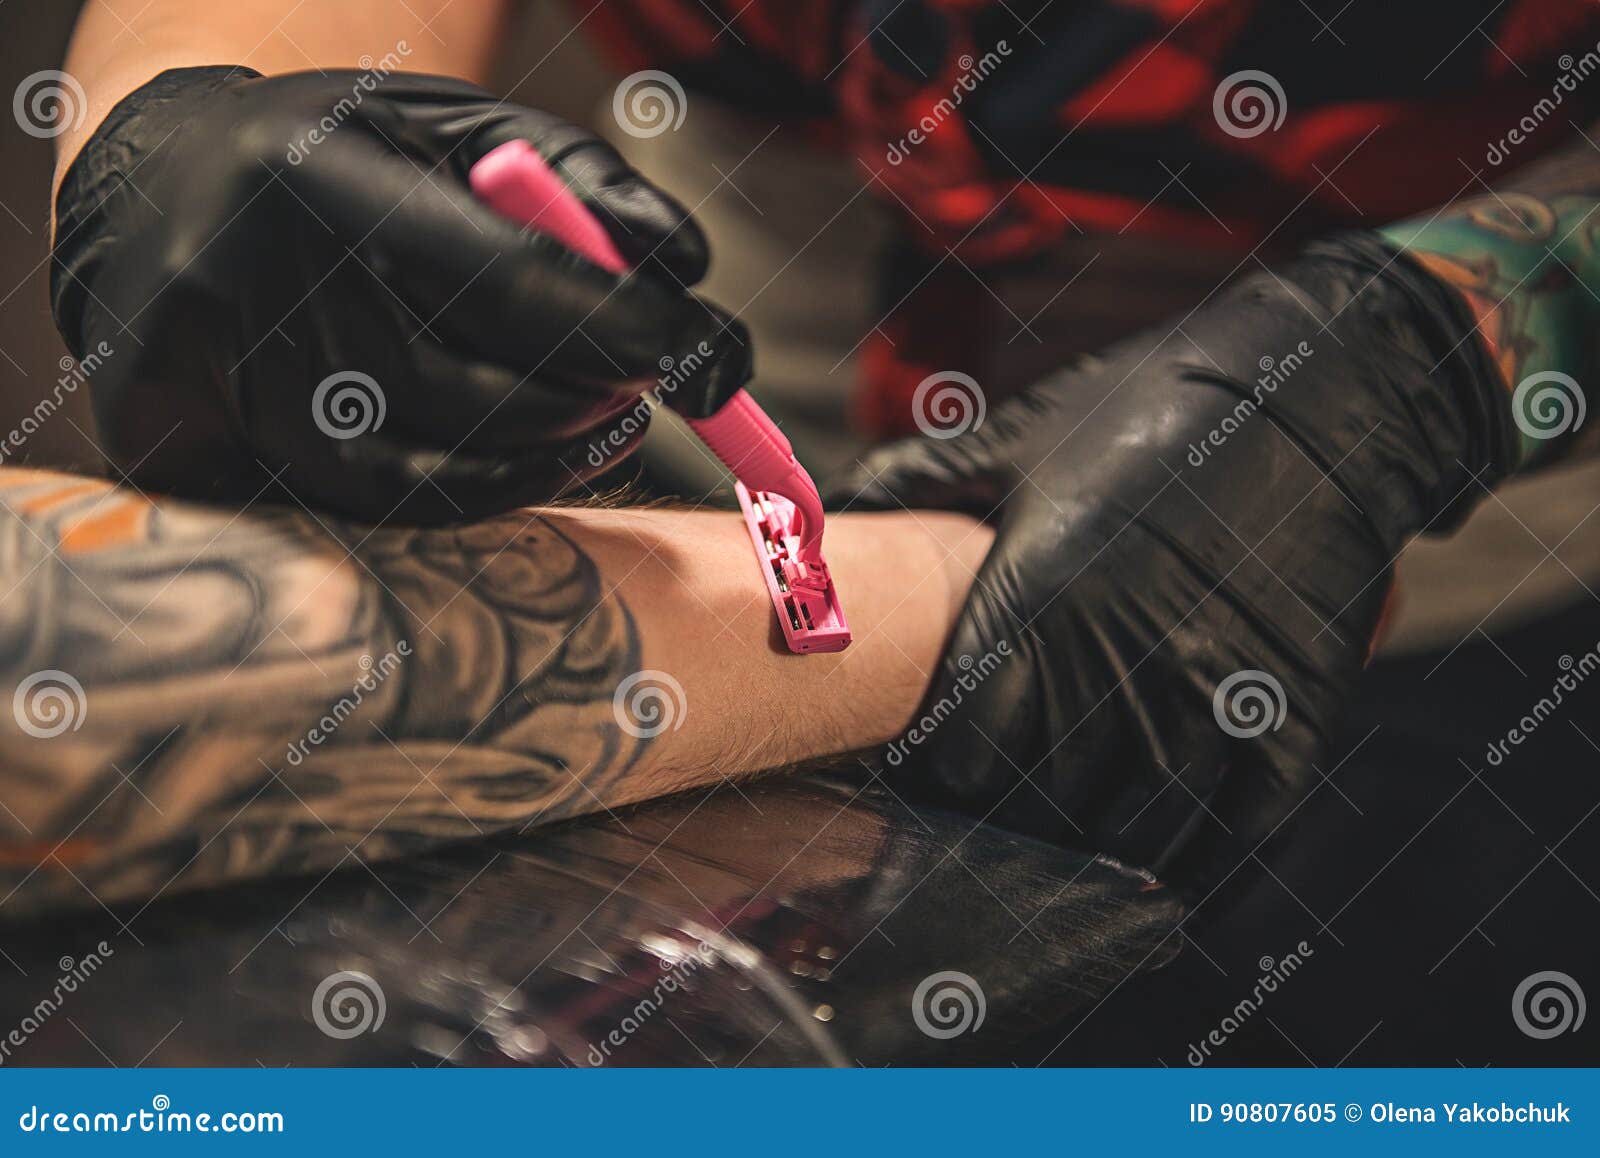 Shaving and Tattoos: What You Need to Know | by Shaving for Men | Medium